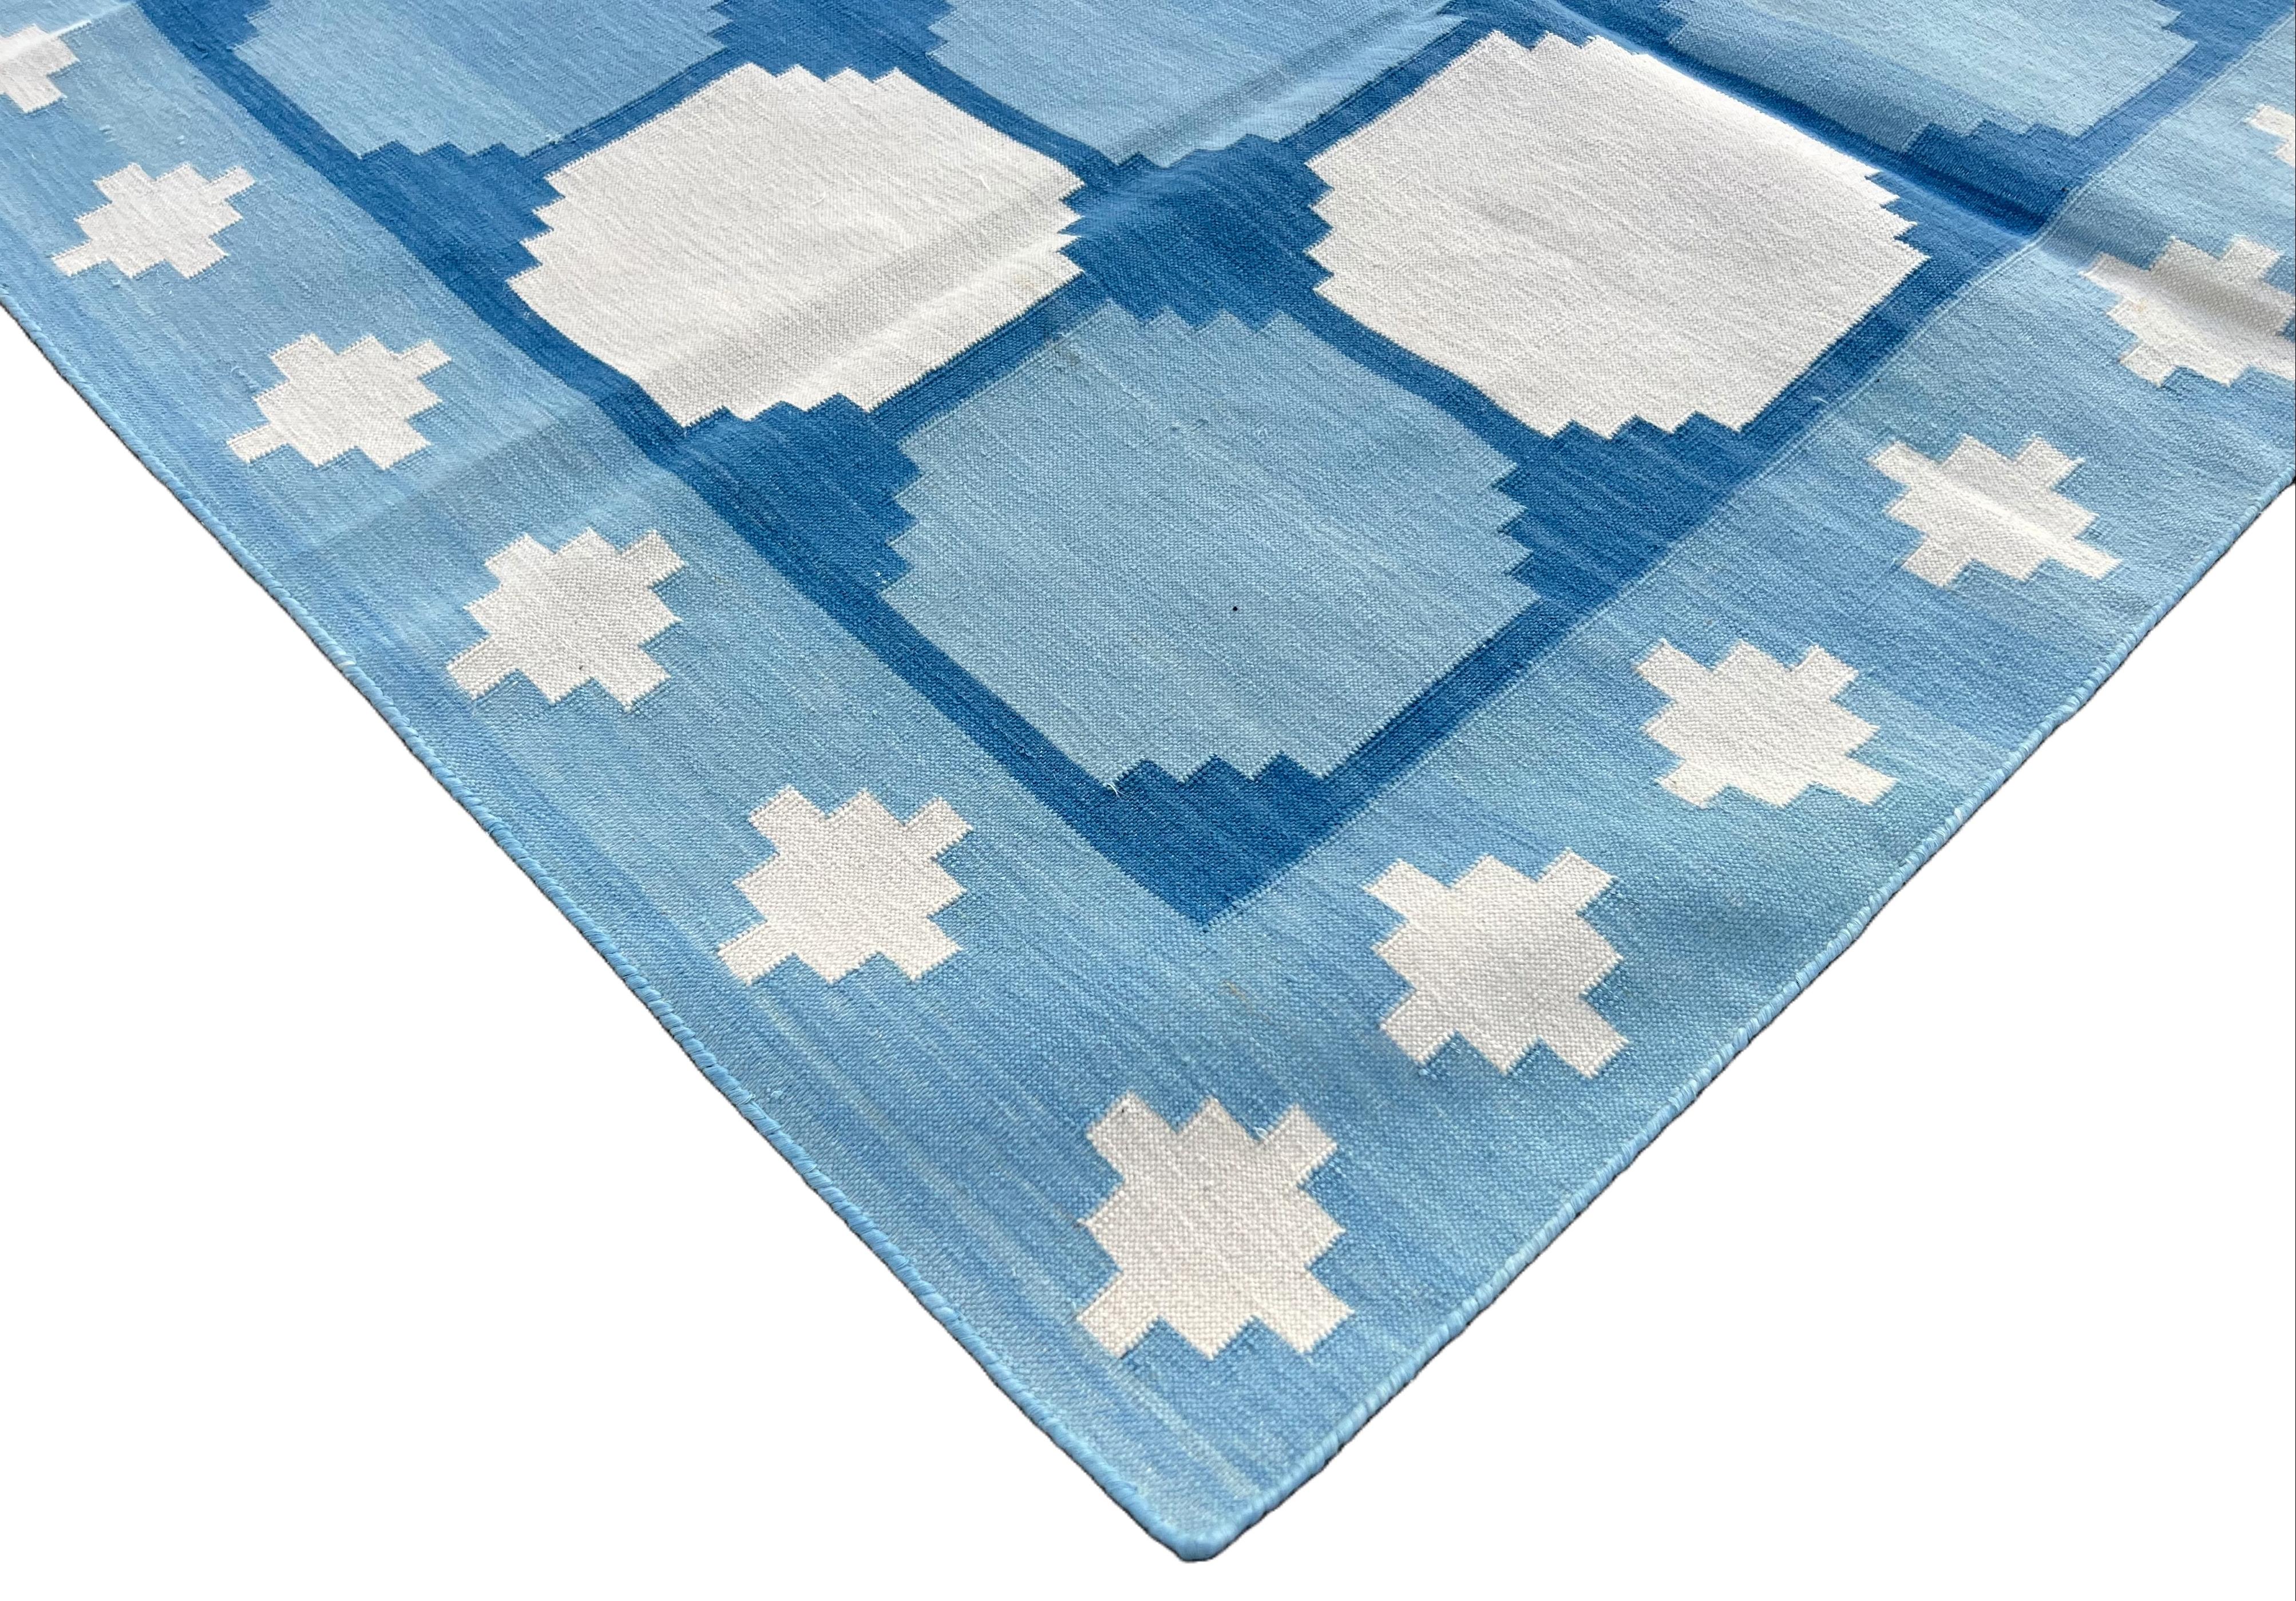 Cotton Natural Vegetable Dyed Sky Blue, Cream  And Indigo Blue Tile Patterned Swedish Rug-4'x6'
These special flat-weave dhurries are hand-woven with 15 ply 100% cotton yarn. Due to the special manufacturing techniques used to create our rugs, the